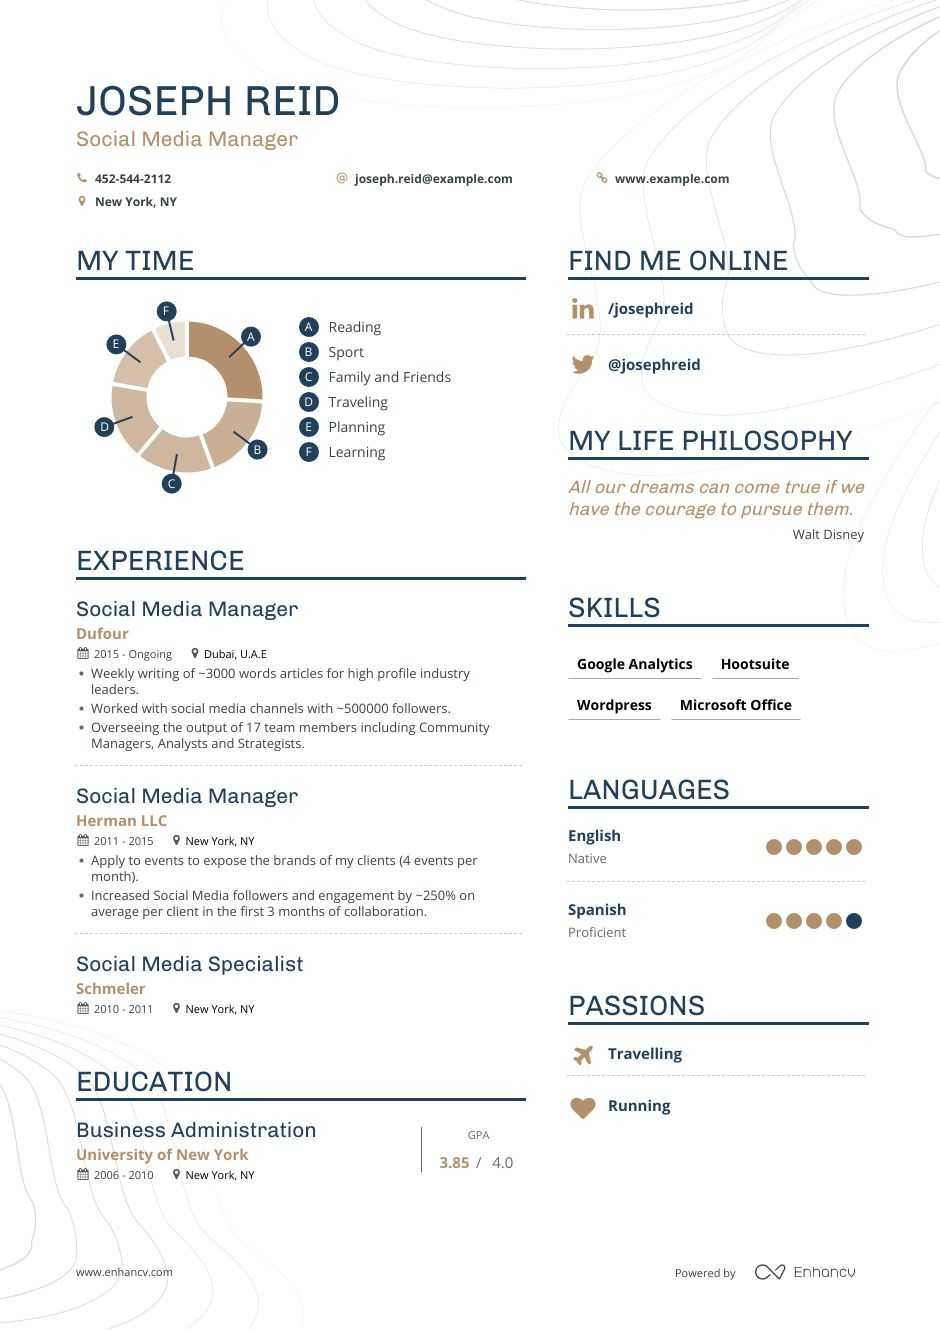 Social Media Manager Resume Examples Skills Templates More For 2020 inside sizing 940 X 1330